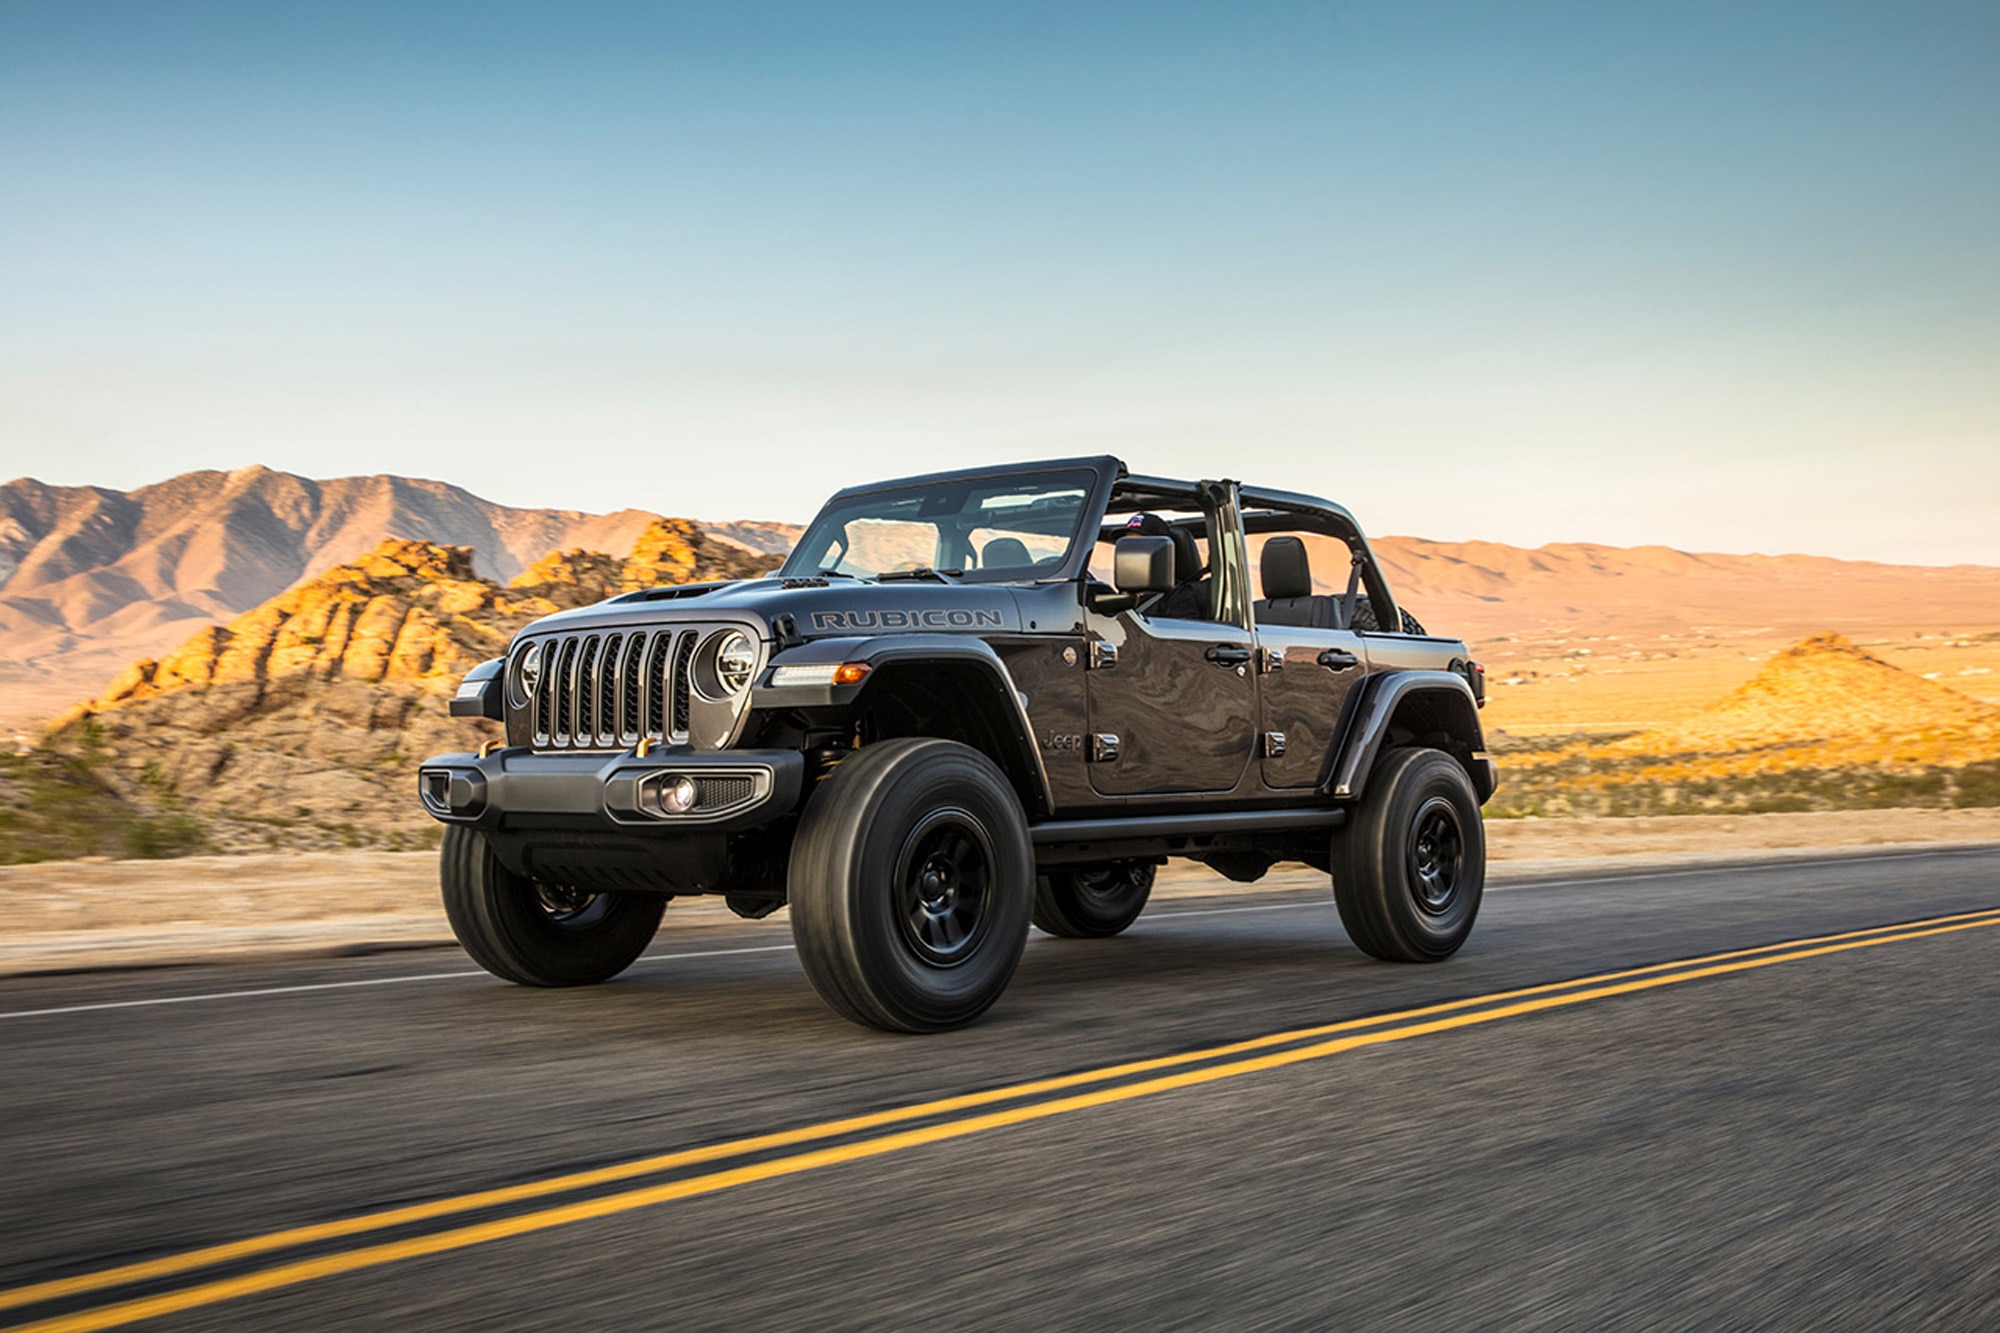 Jeep Wrangler Rubicon 392 driving down desert highway with roof off